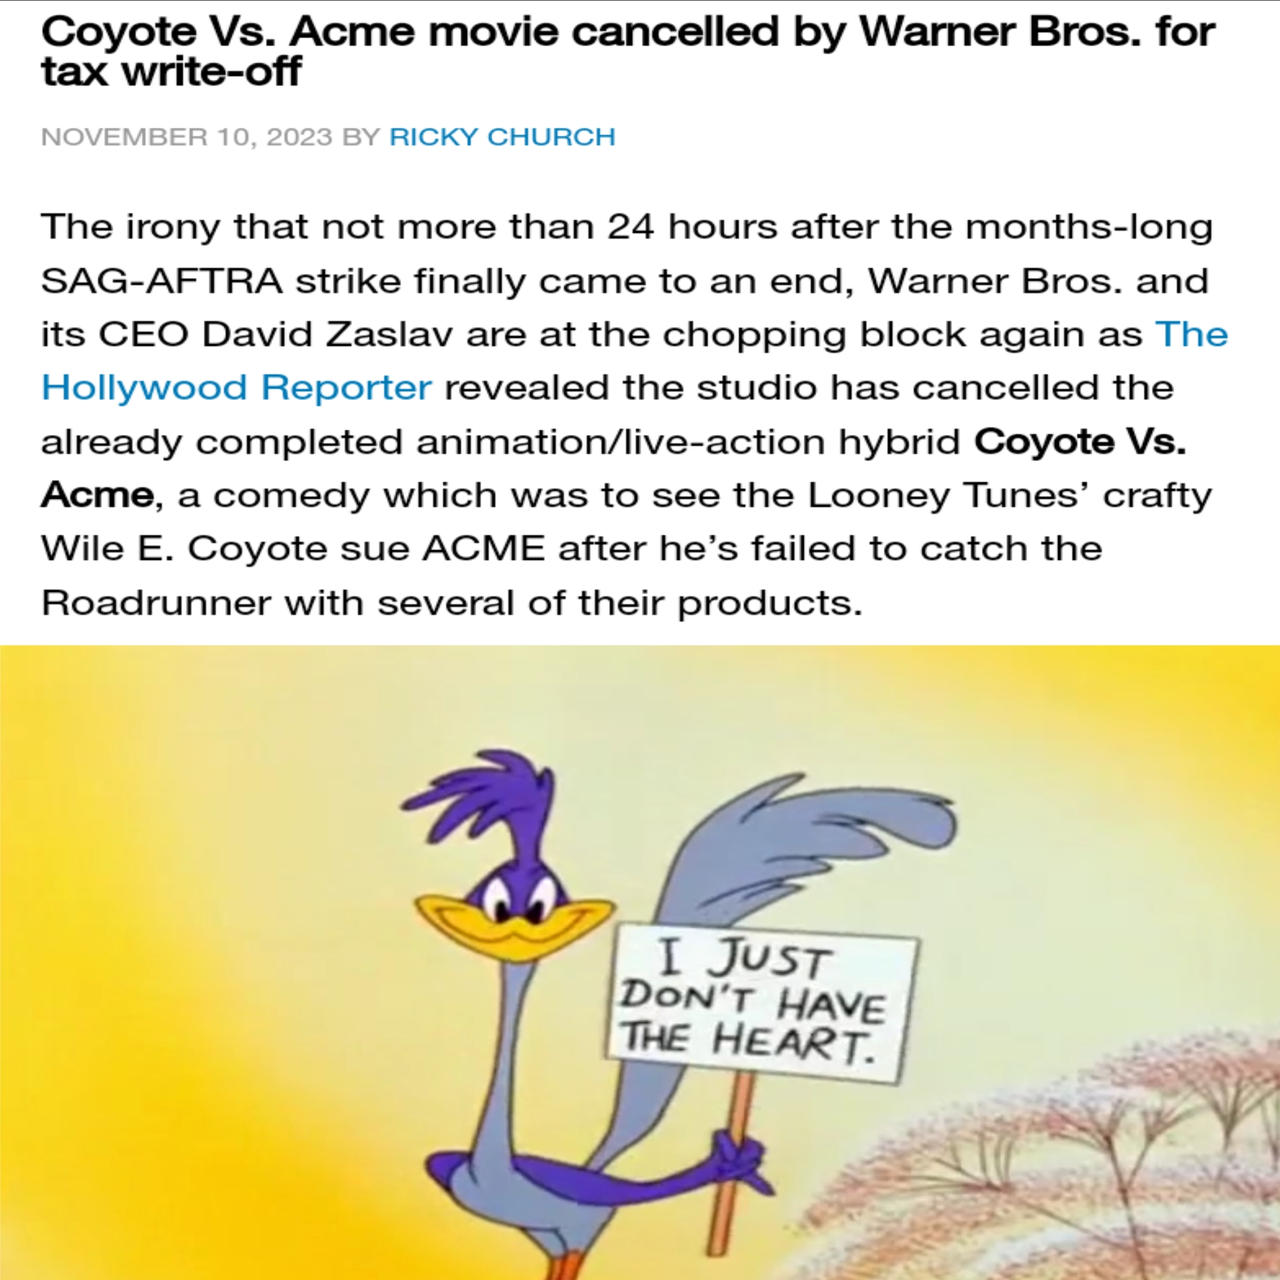 Coyote Vs. Acme' Movie Canceled by Warner Bros., Reactions